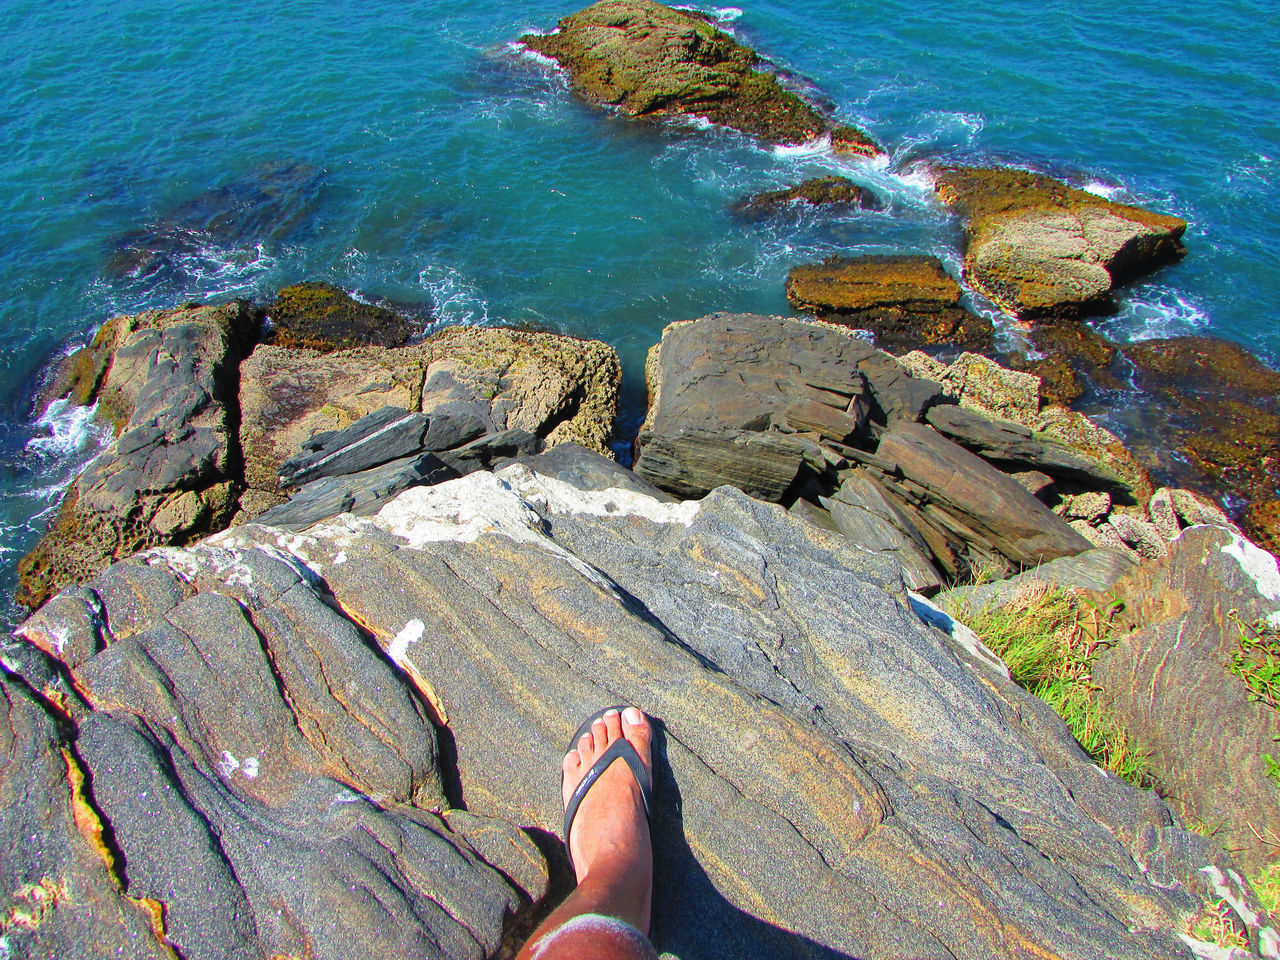 water, rock, human leg, low section, sea, coast, one person, shore, cliff, personal perspective, leisure activity, high angle view, lifestyles, terrain, nature, ocean, day, beach, shoe, land, beauty in nature, scenics - nature, human foot, outdoors, standing, relaxation, adult, sunlight, rock formation, women, geology, limb, tranquility, trip, holiday, vacation, idyllic, tranquil scene